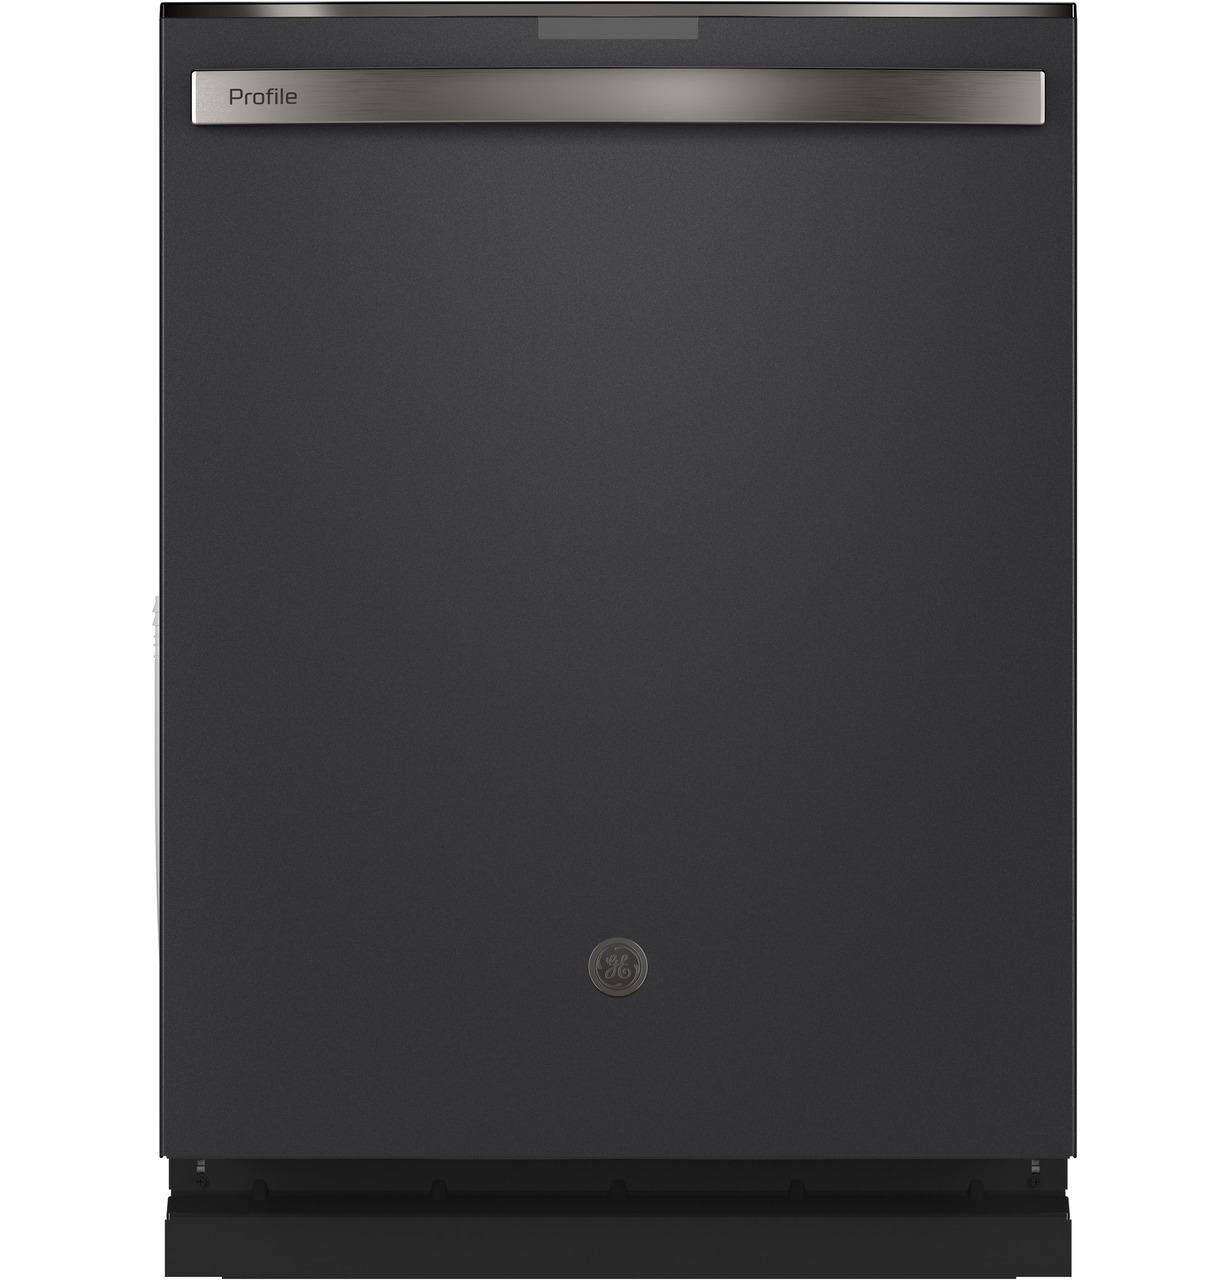 GE top control dishwasher with stainless steel interior